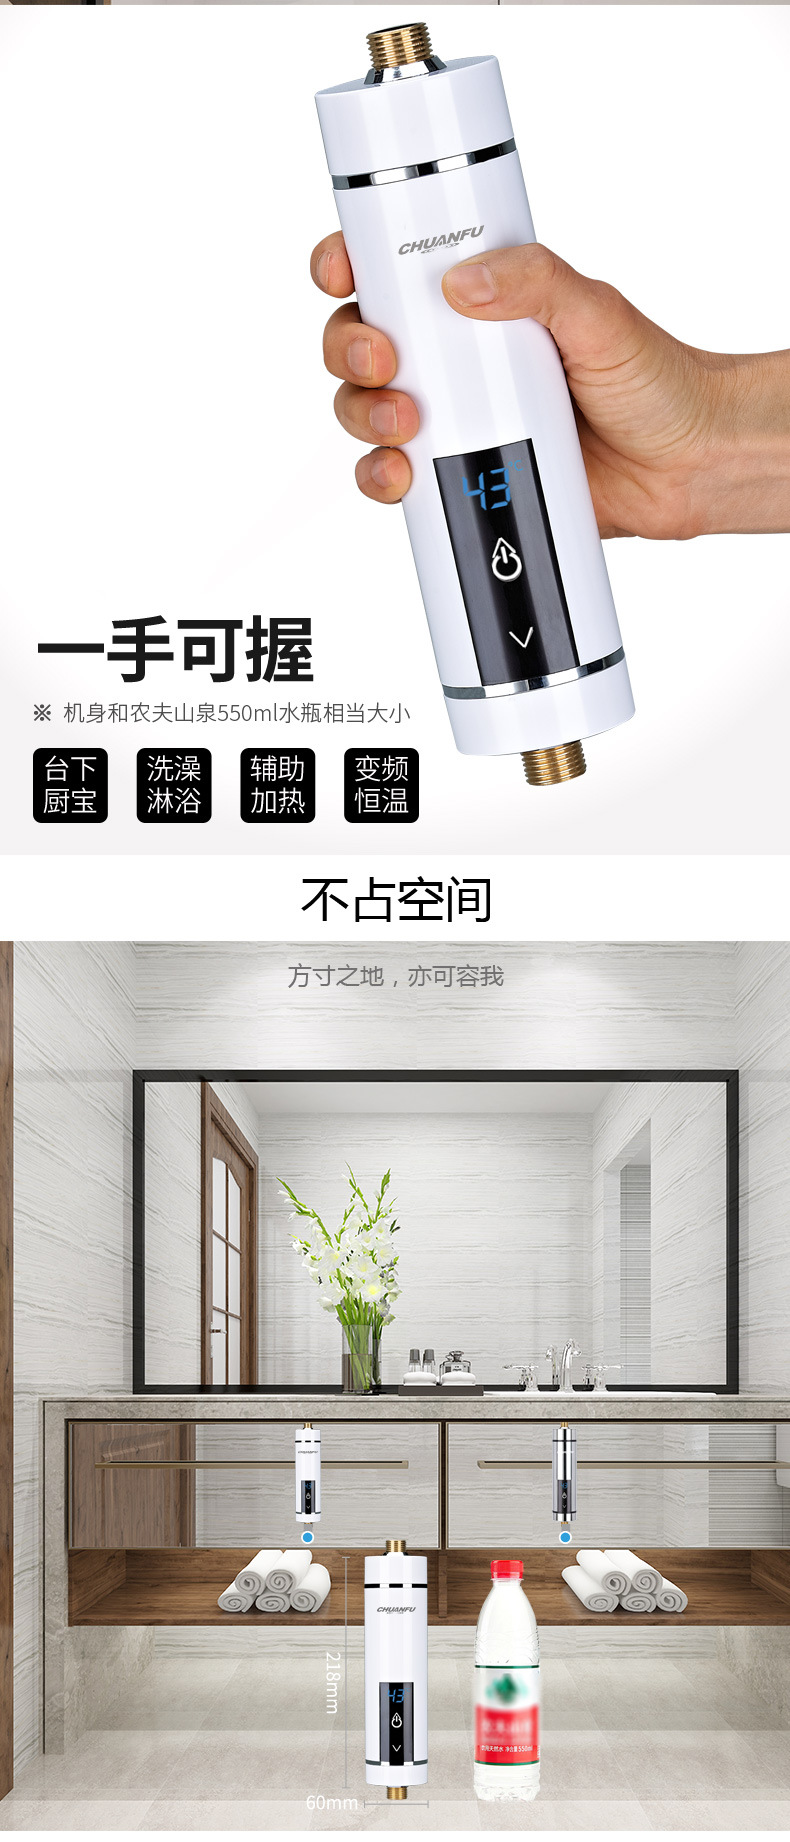 Intelligent Frequency Conversion Constant Temperature Small Kitchen Treasure Rental Room Shower Fast Energy-saving Instant Electric Water Heater